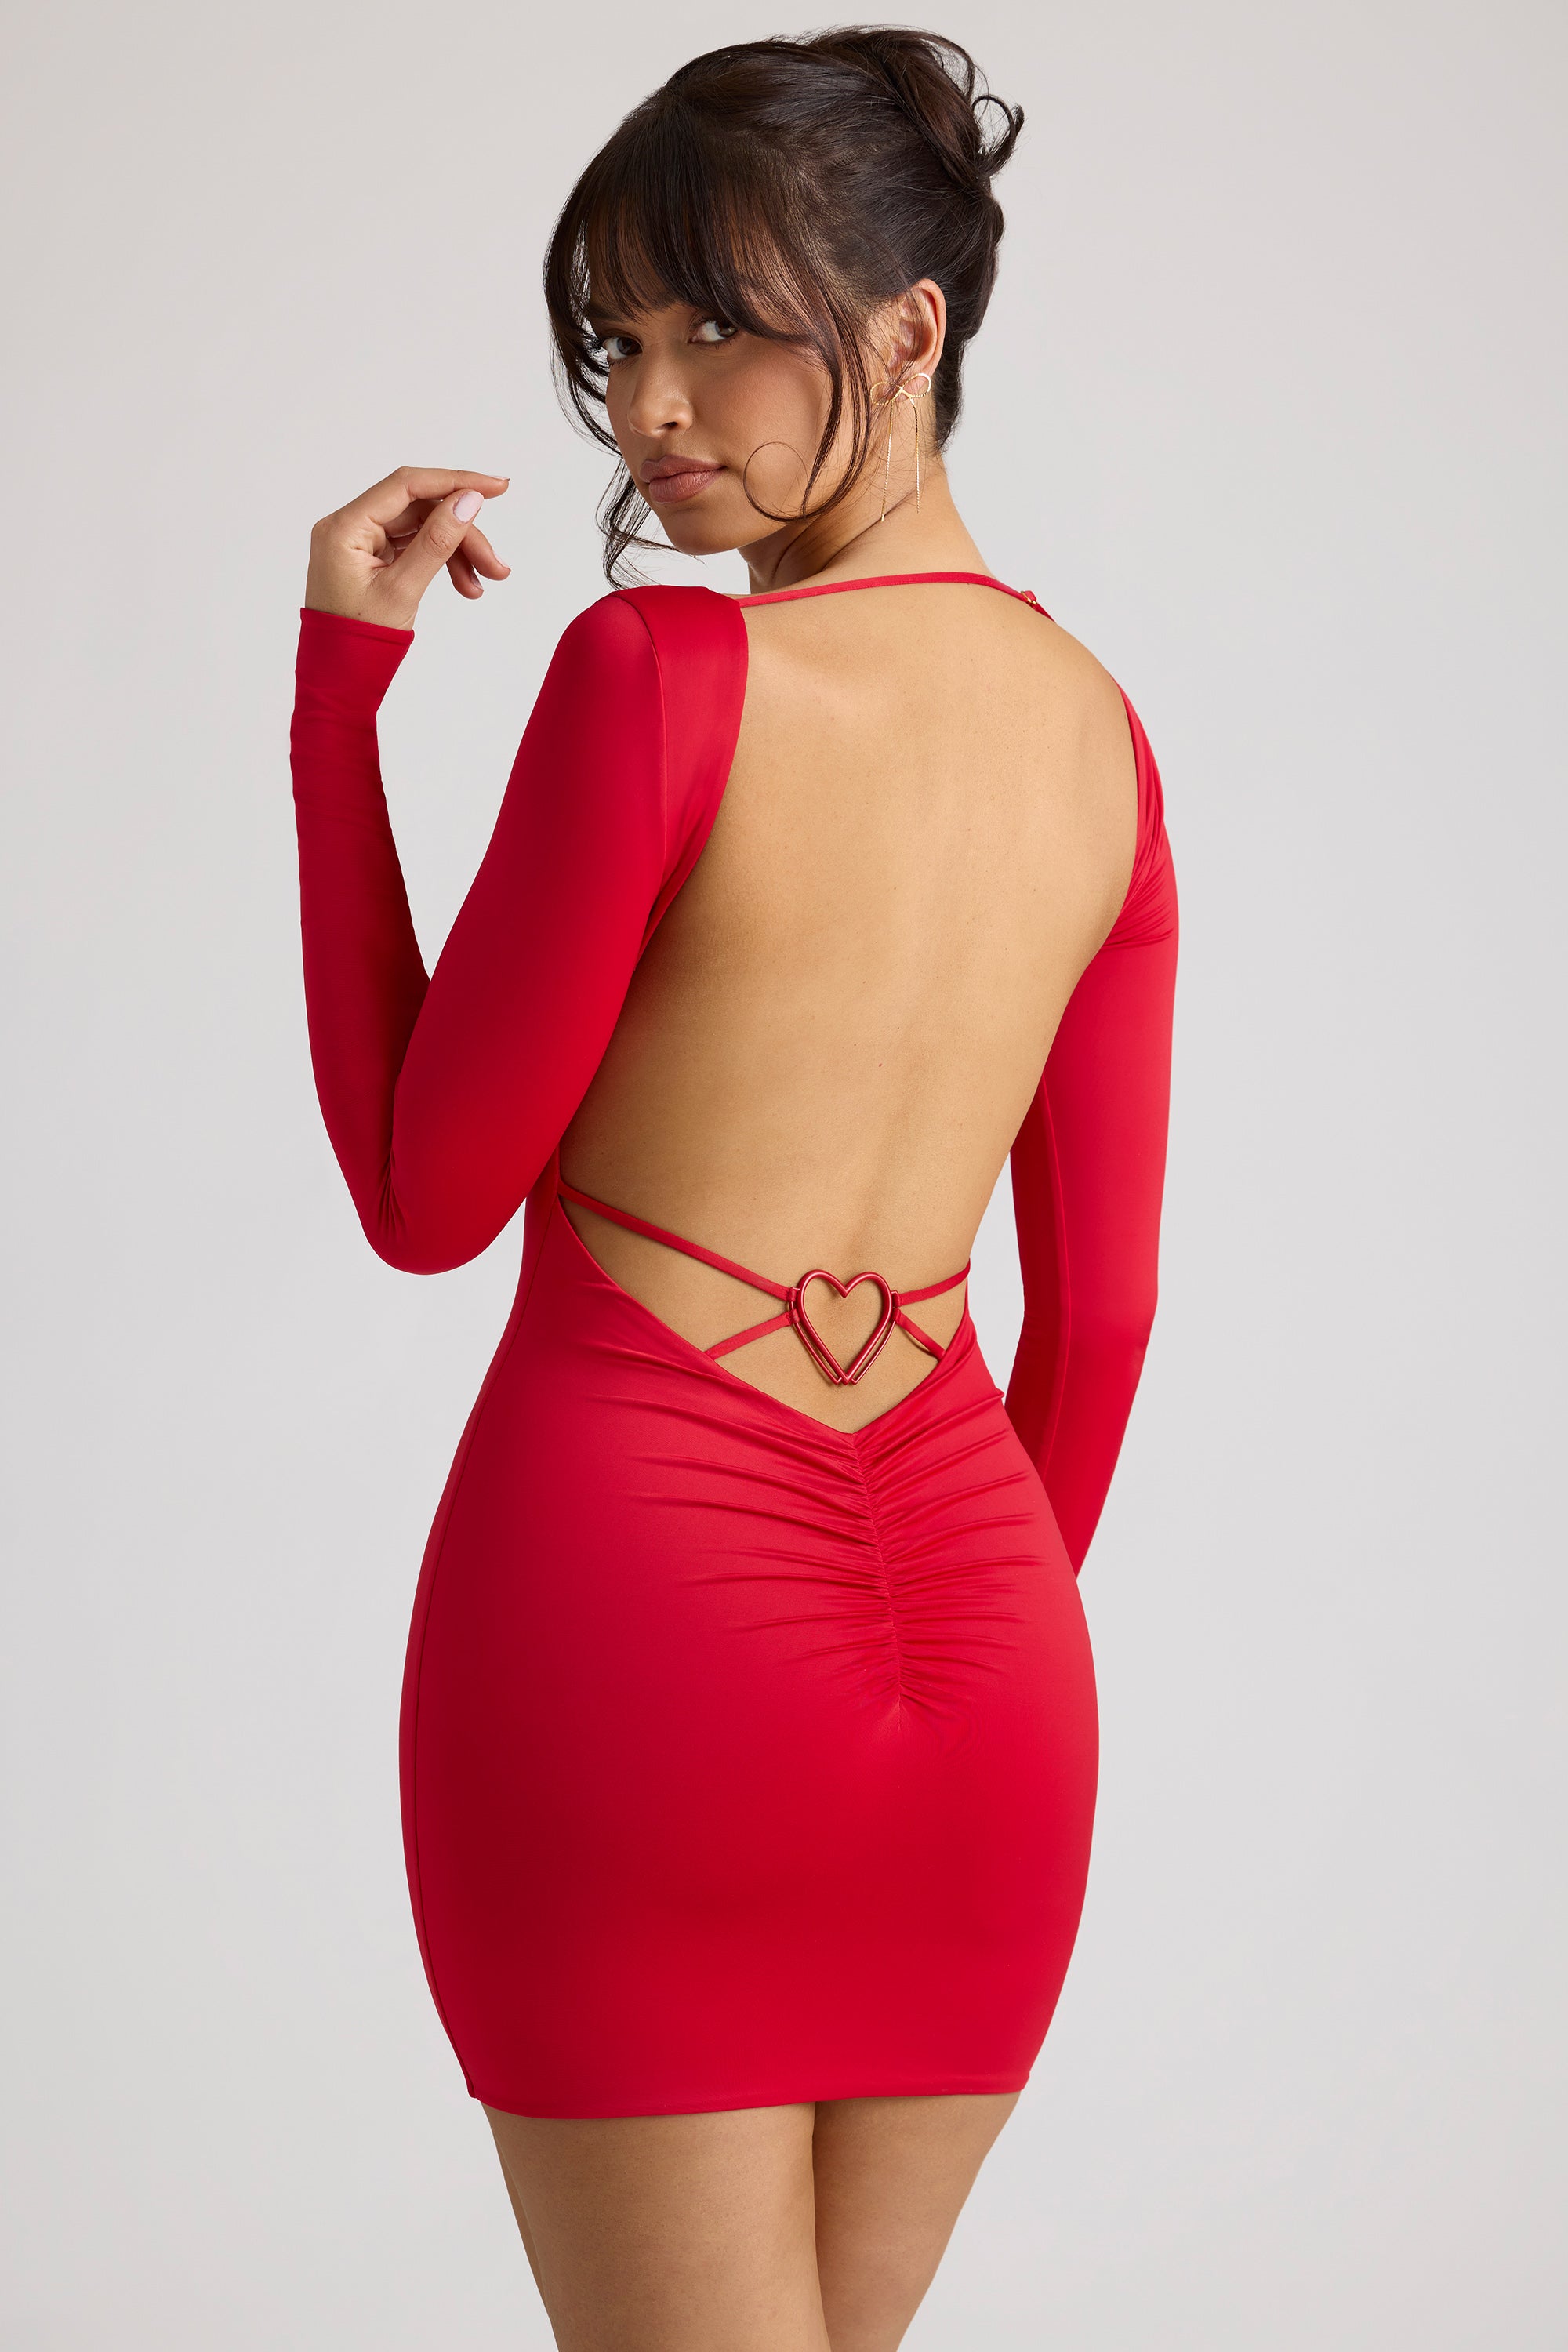 Fire Up Your Looks With A Red Dress - Lookiero Blog